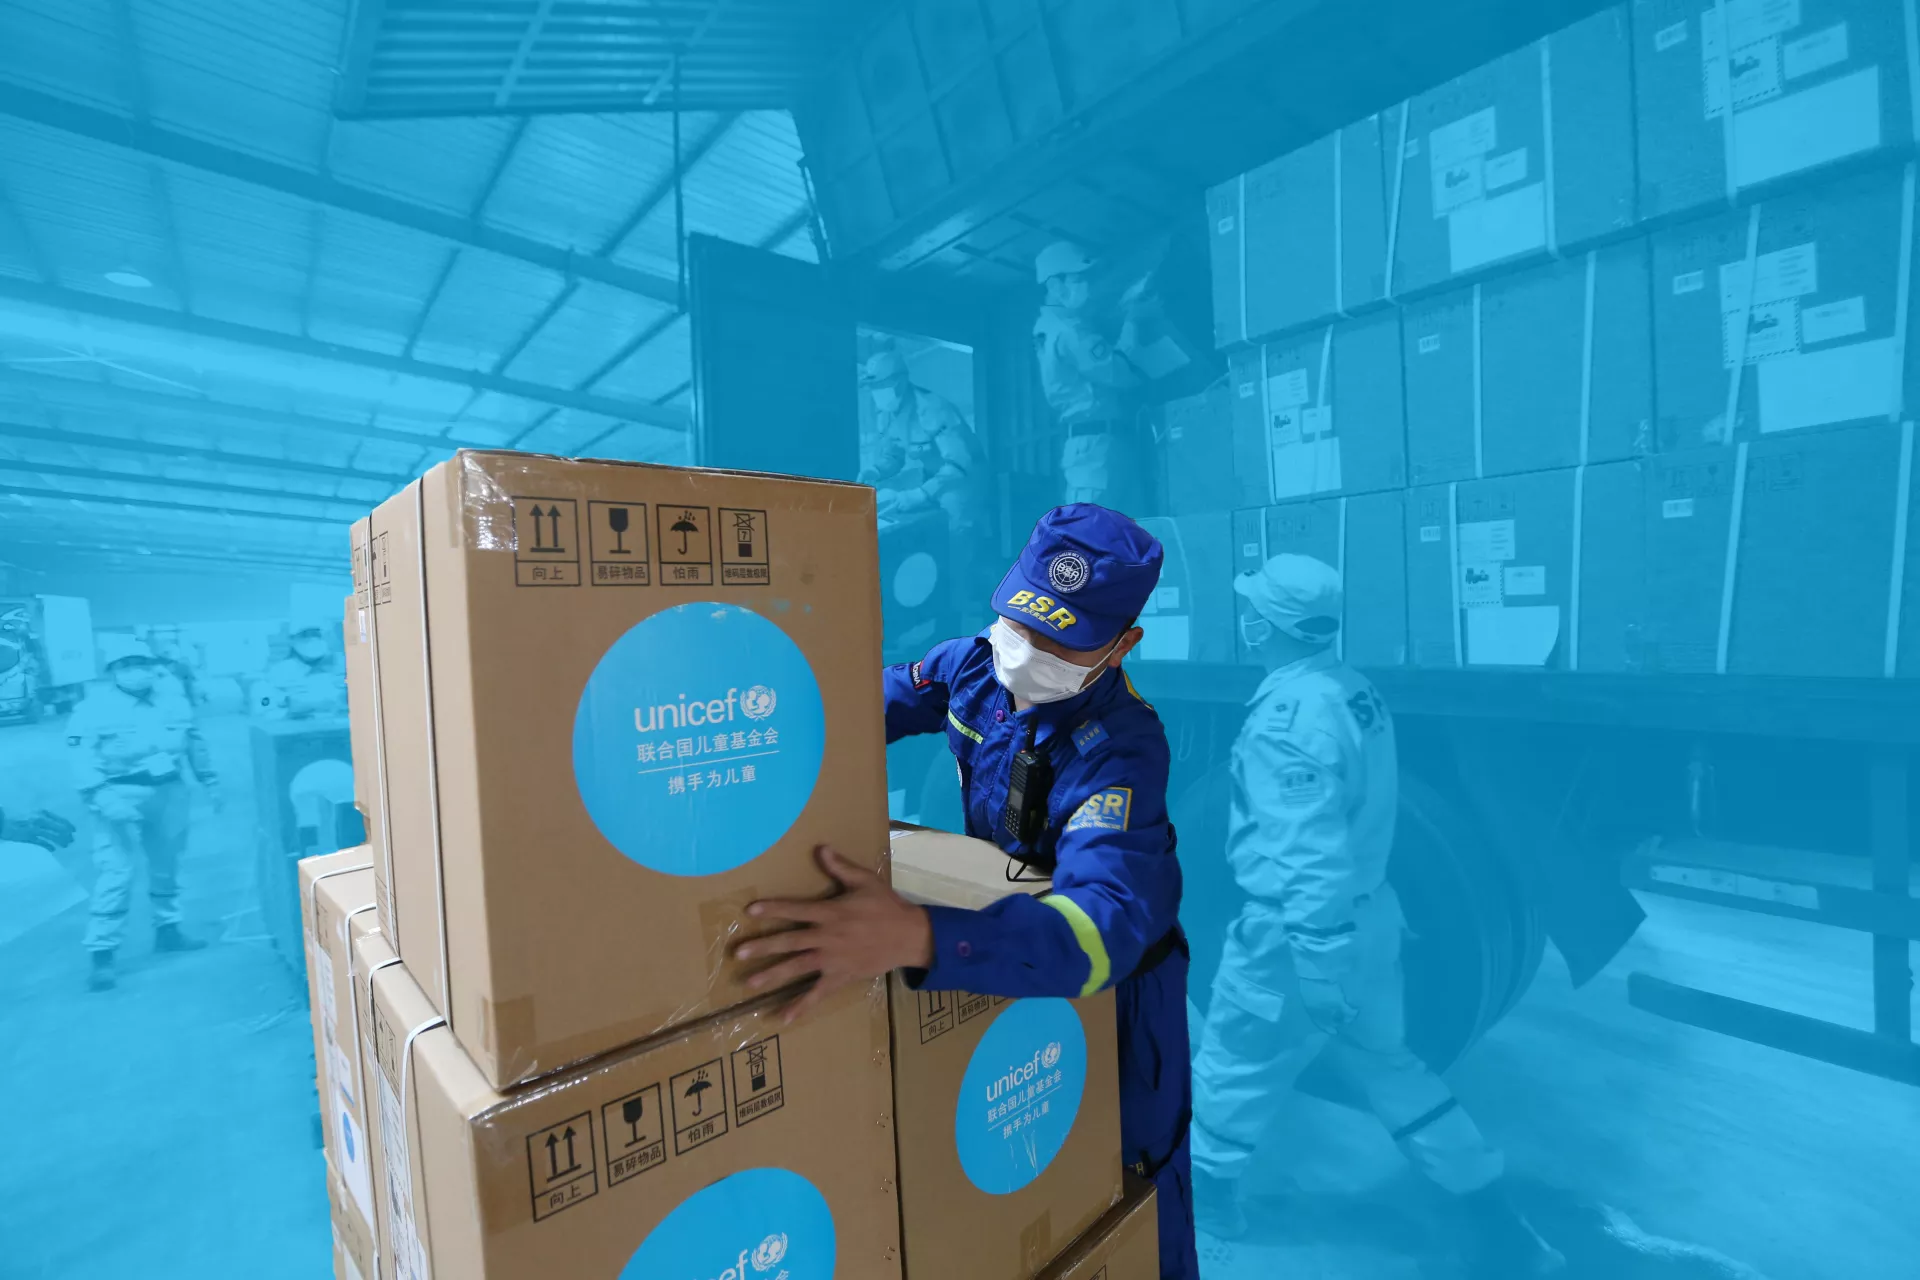 Volunteers carry down UNICEF donated supplies in an emergency warehouse of the Hubei Charity Foundation in Wuhan, the epicenter of the COVID-19 outbreak, on 18 March 2020.